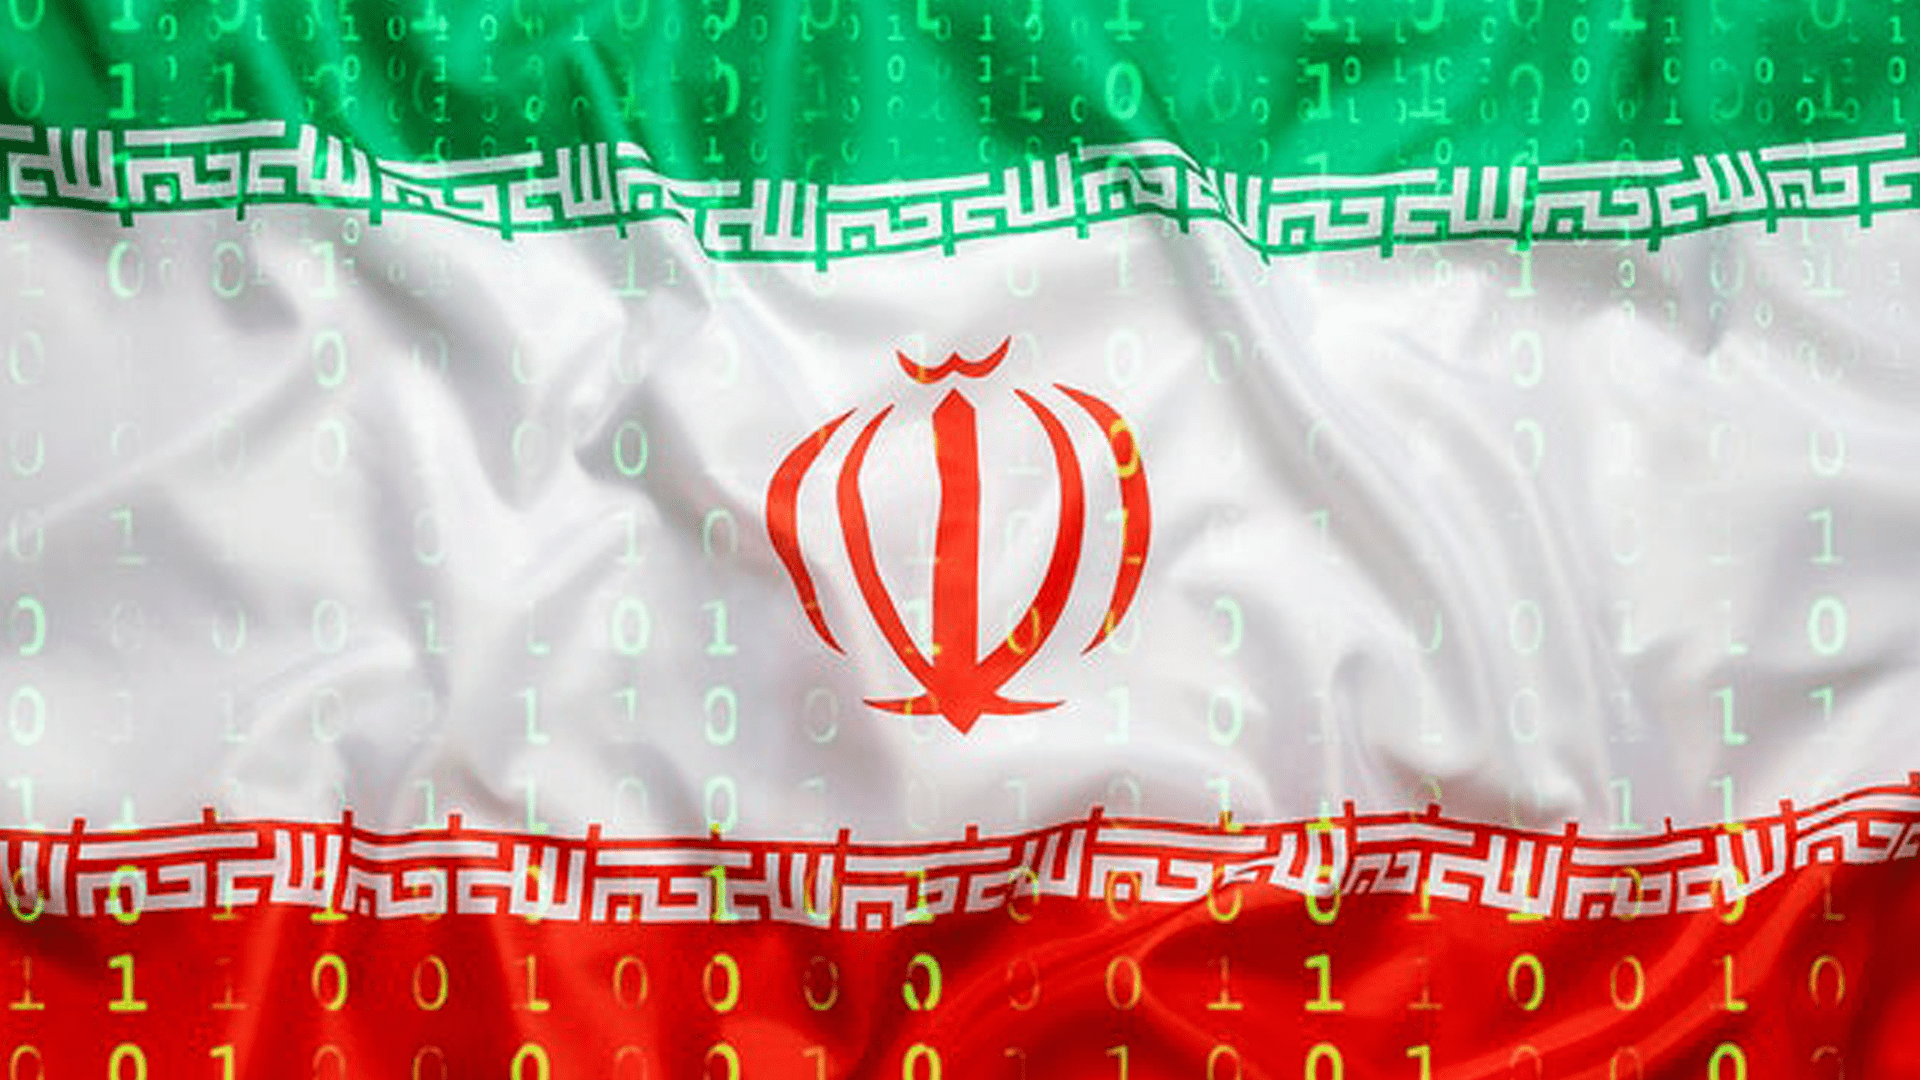 Op-Ed in AL.com – After Soleimani: Iran and cyber domain